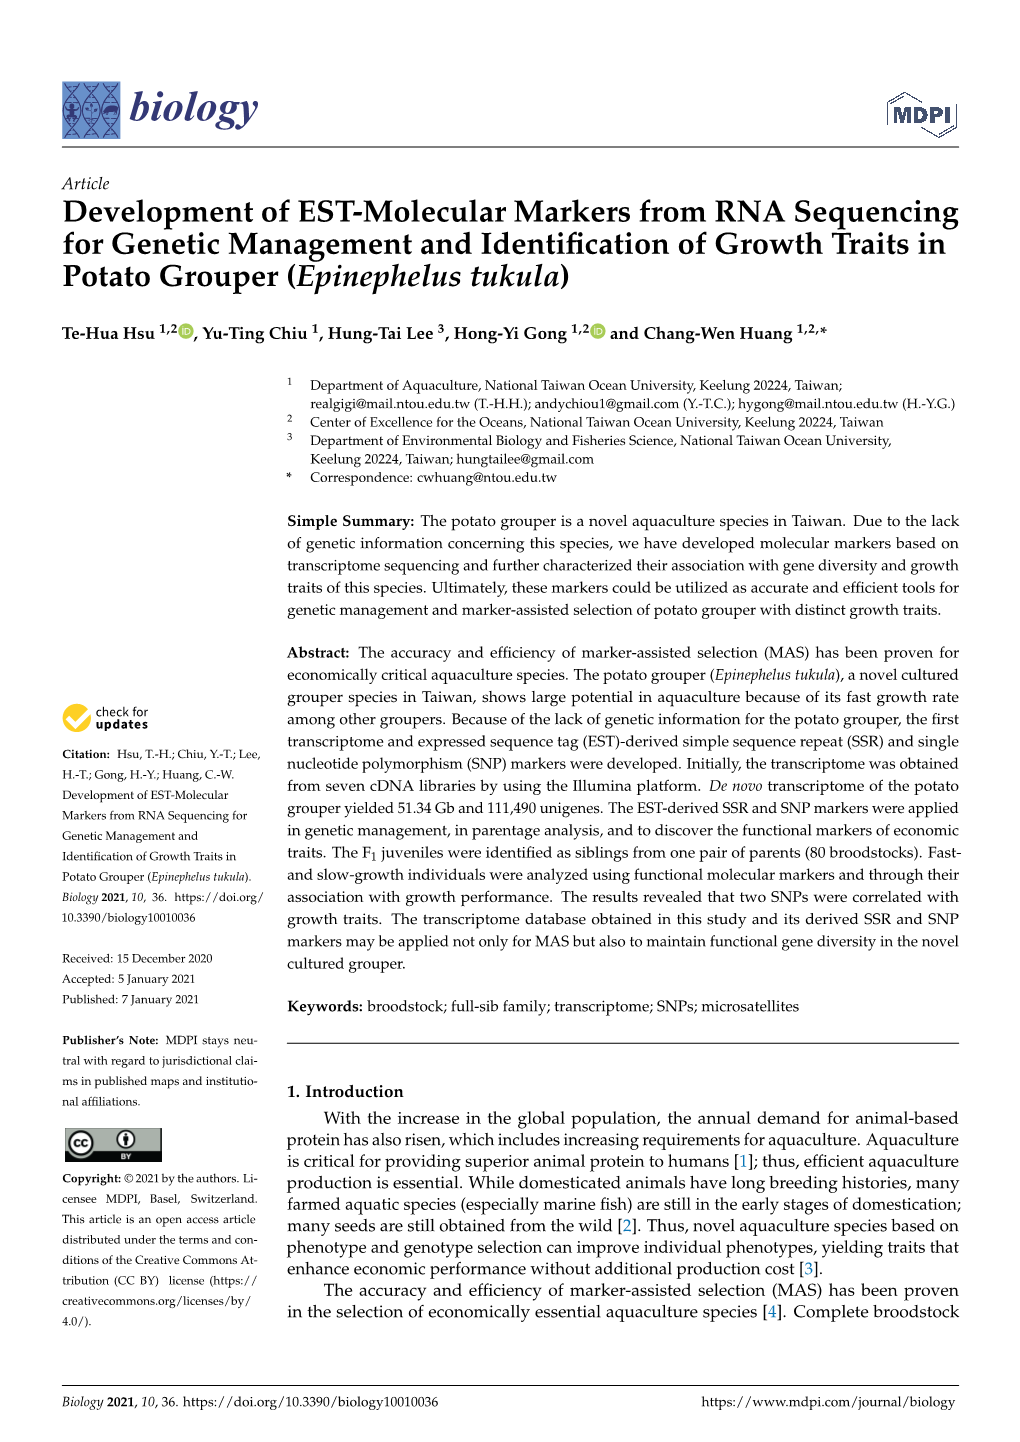 Development of EST-Molecular Markers from RNA Sequencing for Genetic Management and Identiﬁcation of Growth Traits in Potato Grouper (Epinephelus Tukula)